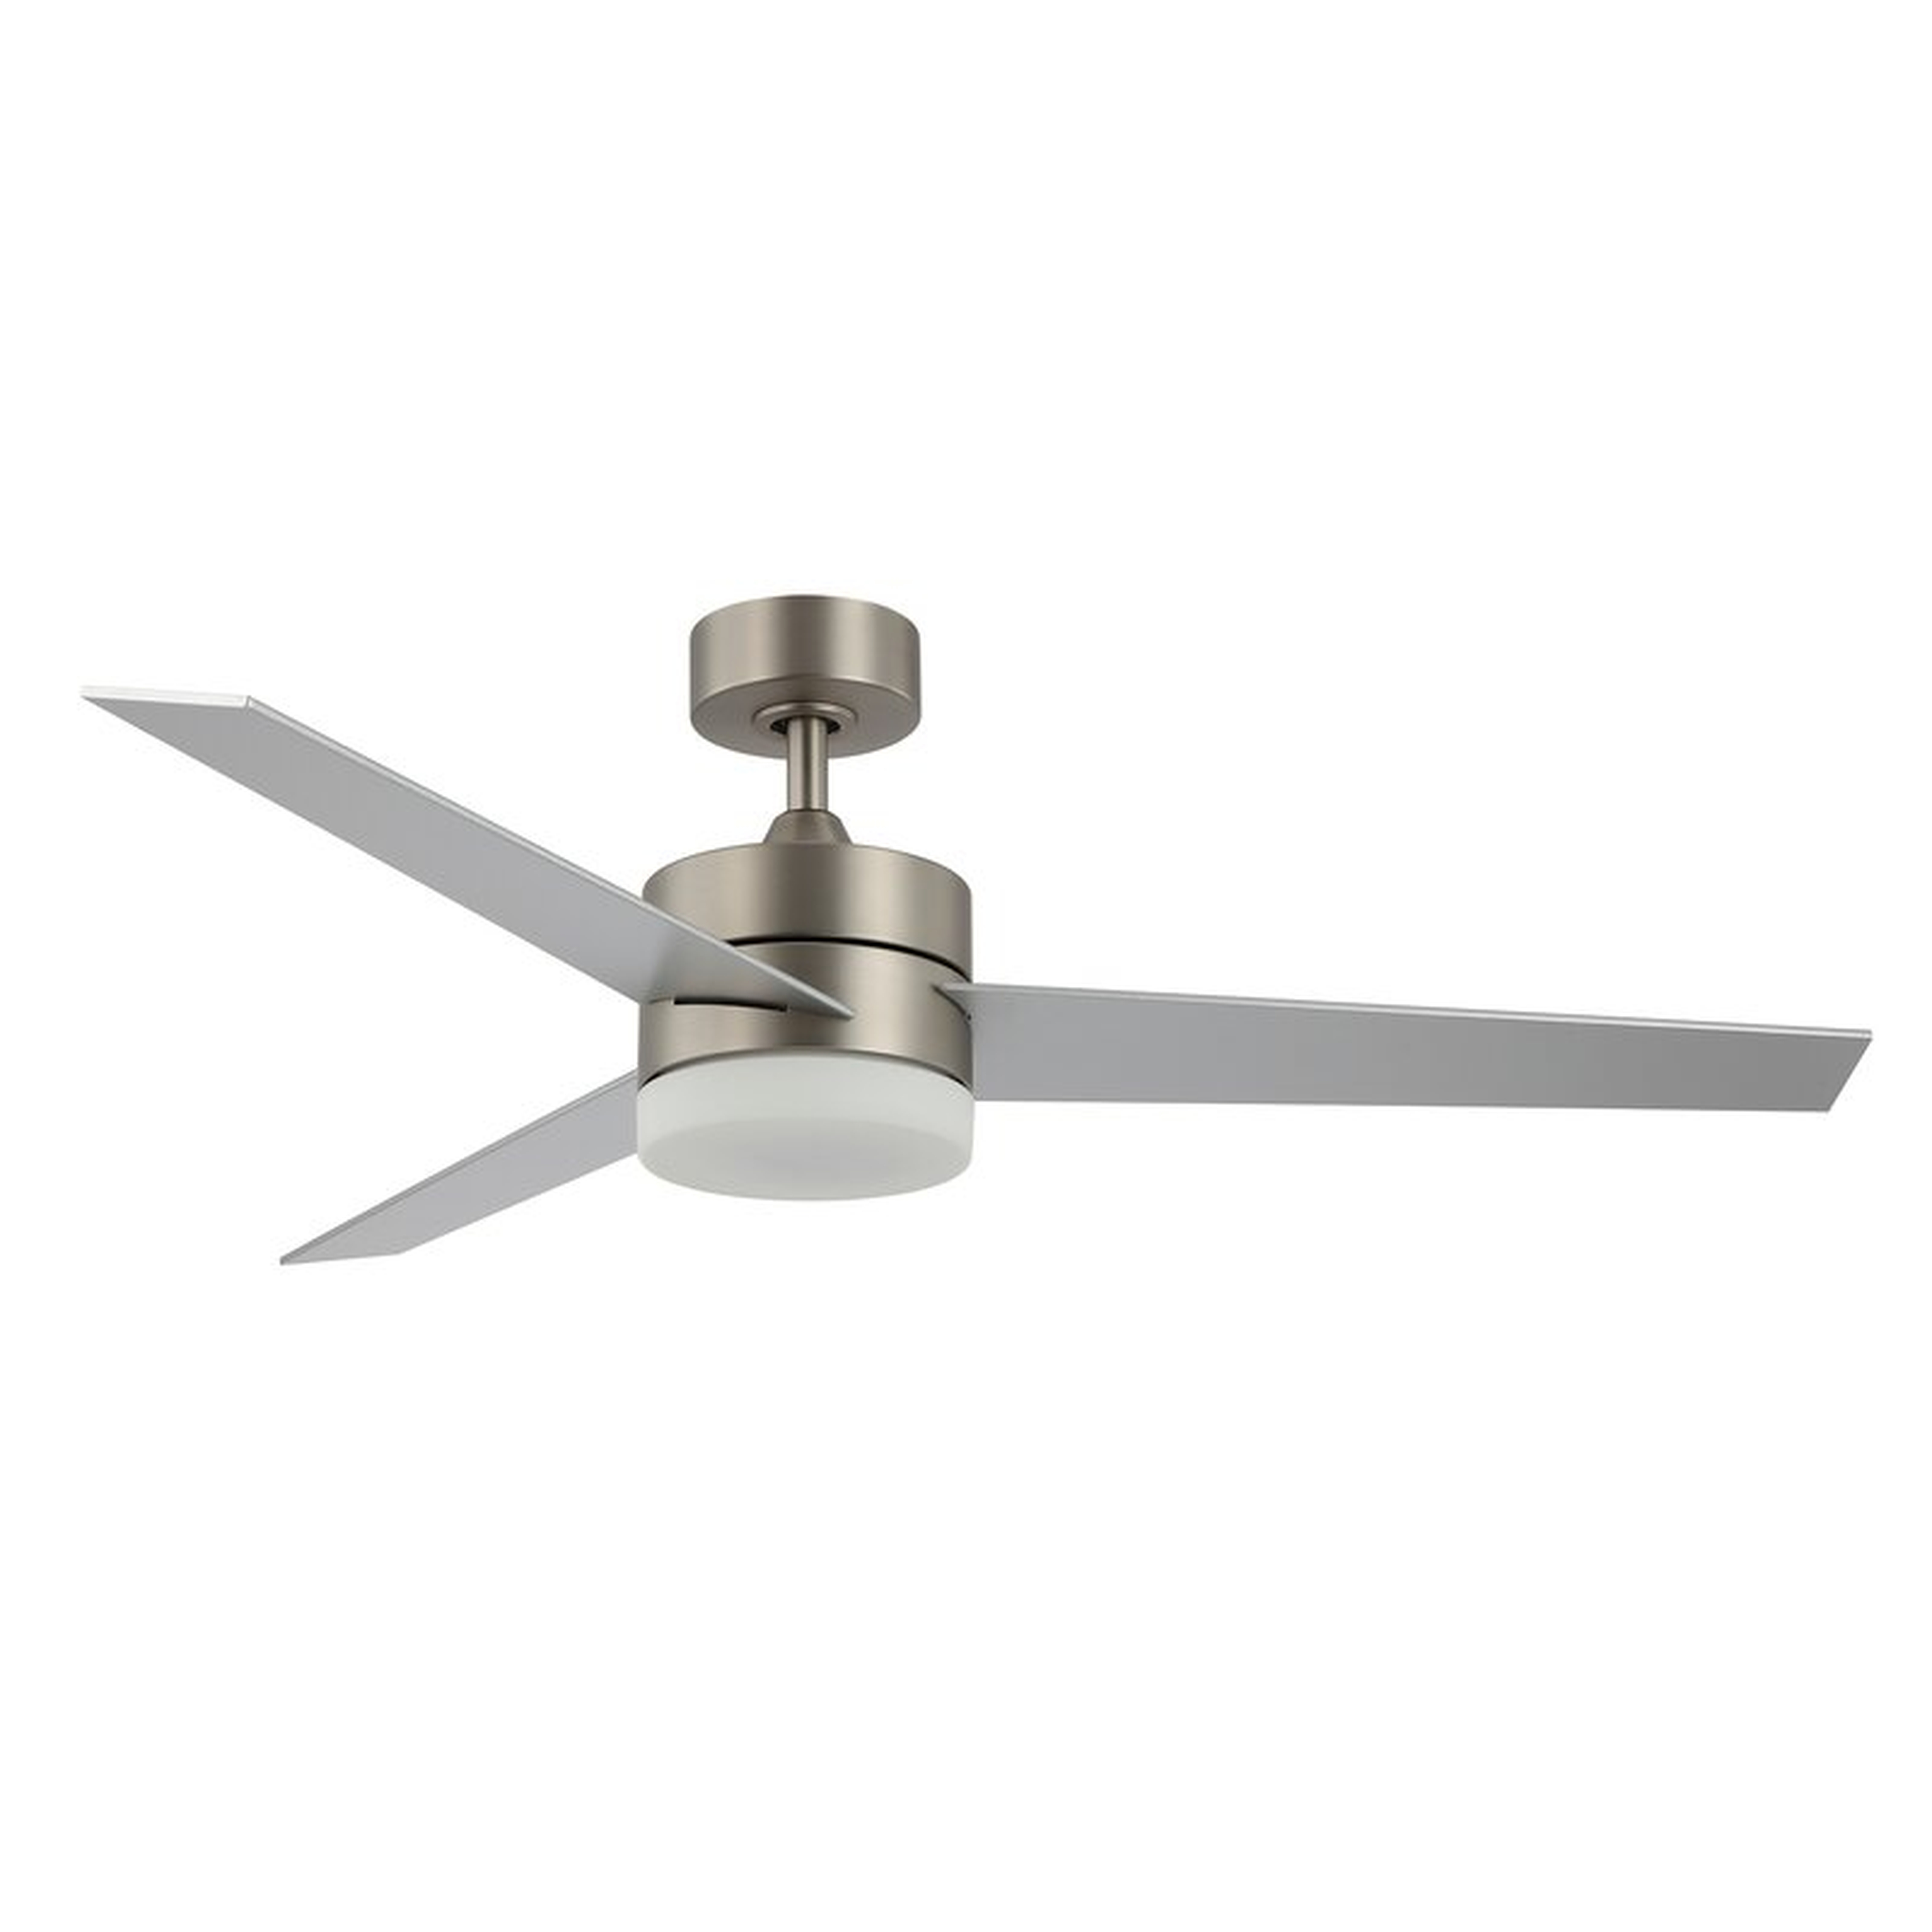 52'' Manhattan 3 - Blade LED Standard Ceiling Fan with Remote Control and Light Kit Included - Wayfair